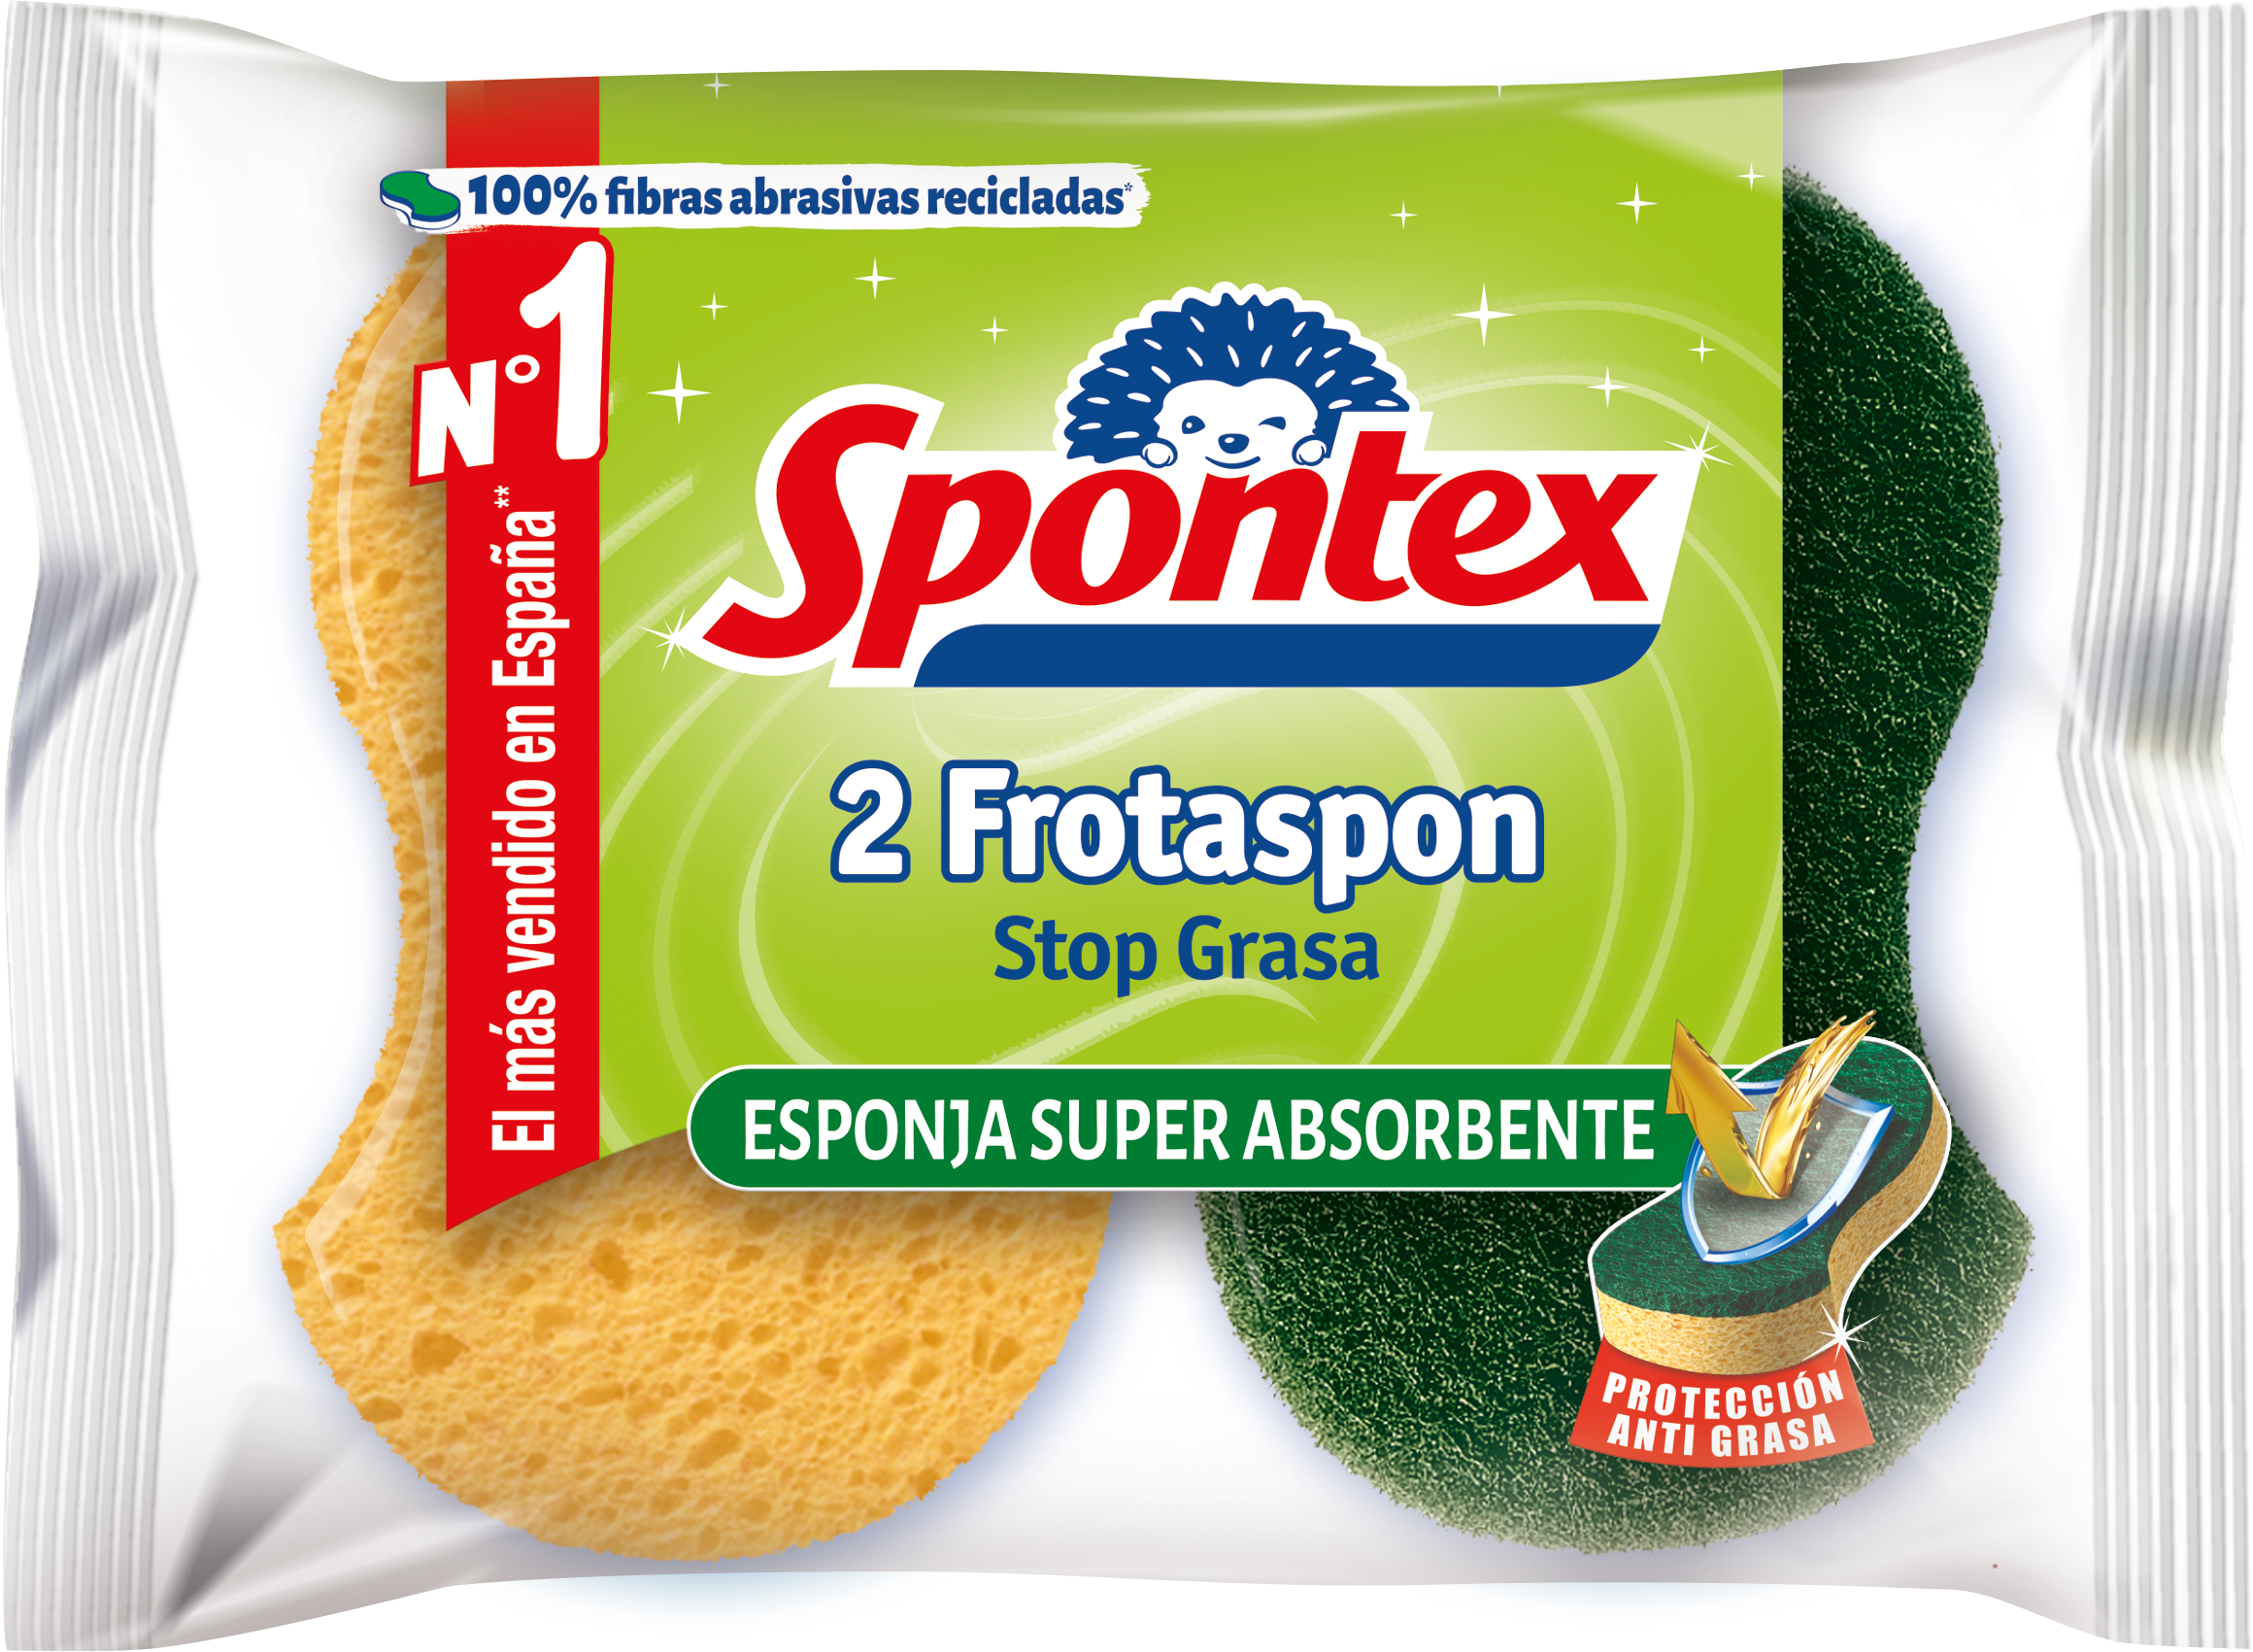 Spontex frotaspon Lozenges (Pack of 2 Stop Device and Cellulose Fiber  Grease Green